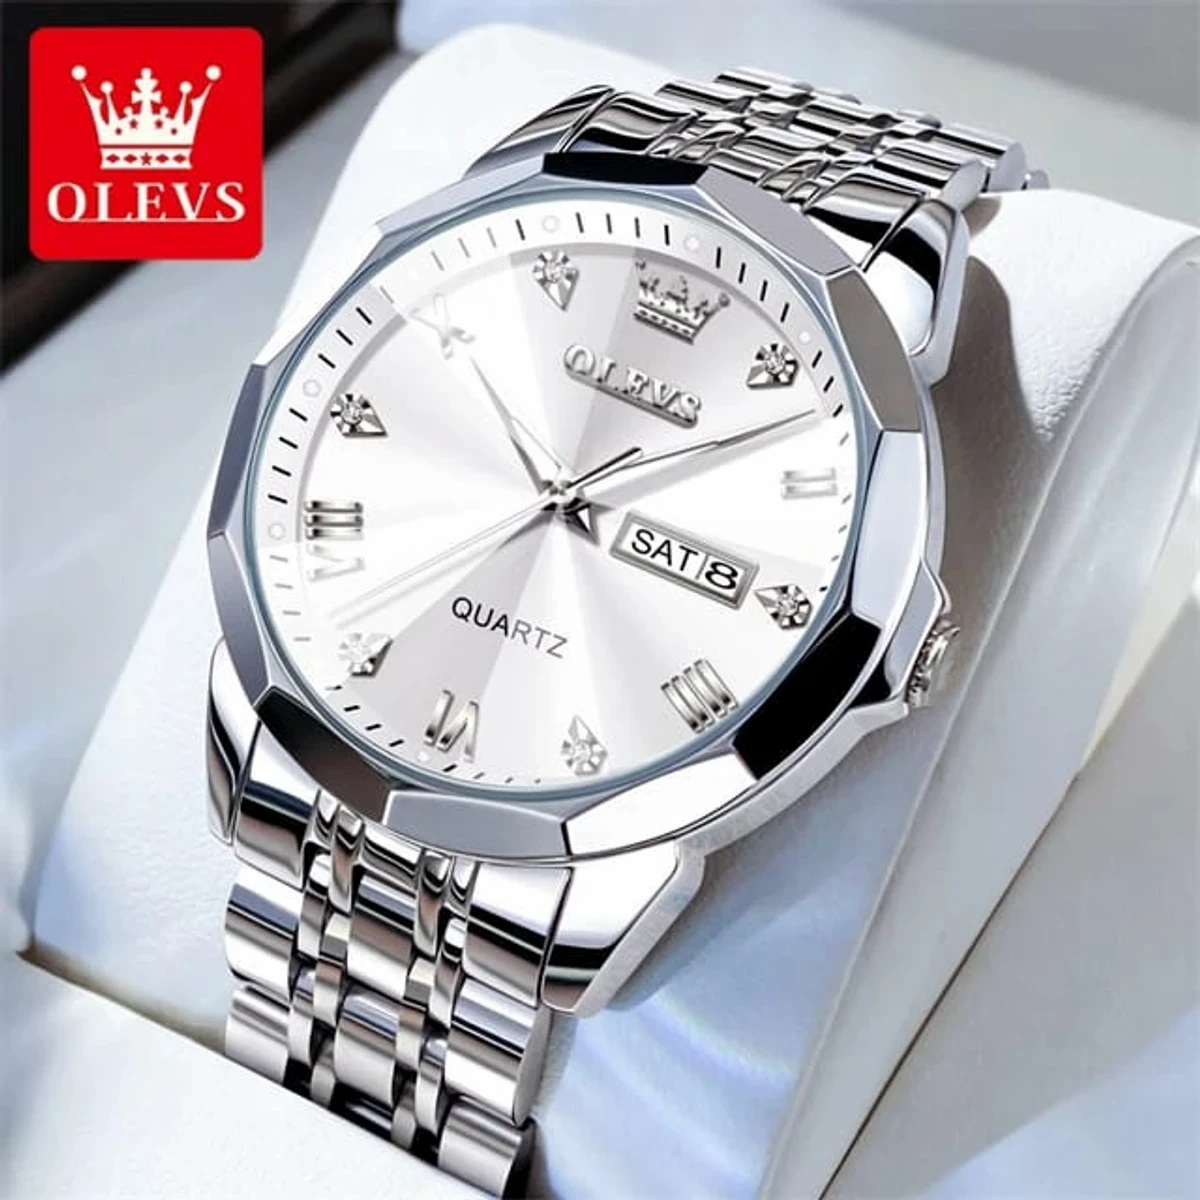 OLEVS MODEL 9931 Watch for Men Stainless Steel Watches - 9941 FULL SILVER COOLER WATCH- MAN  WATCH